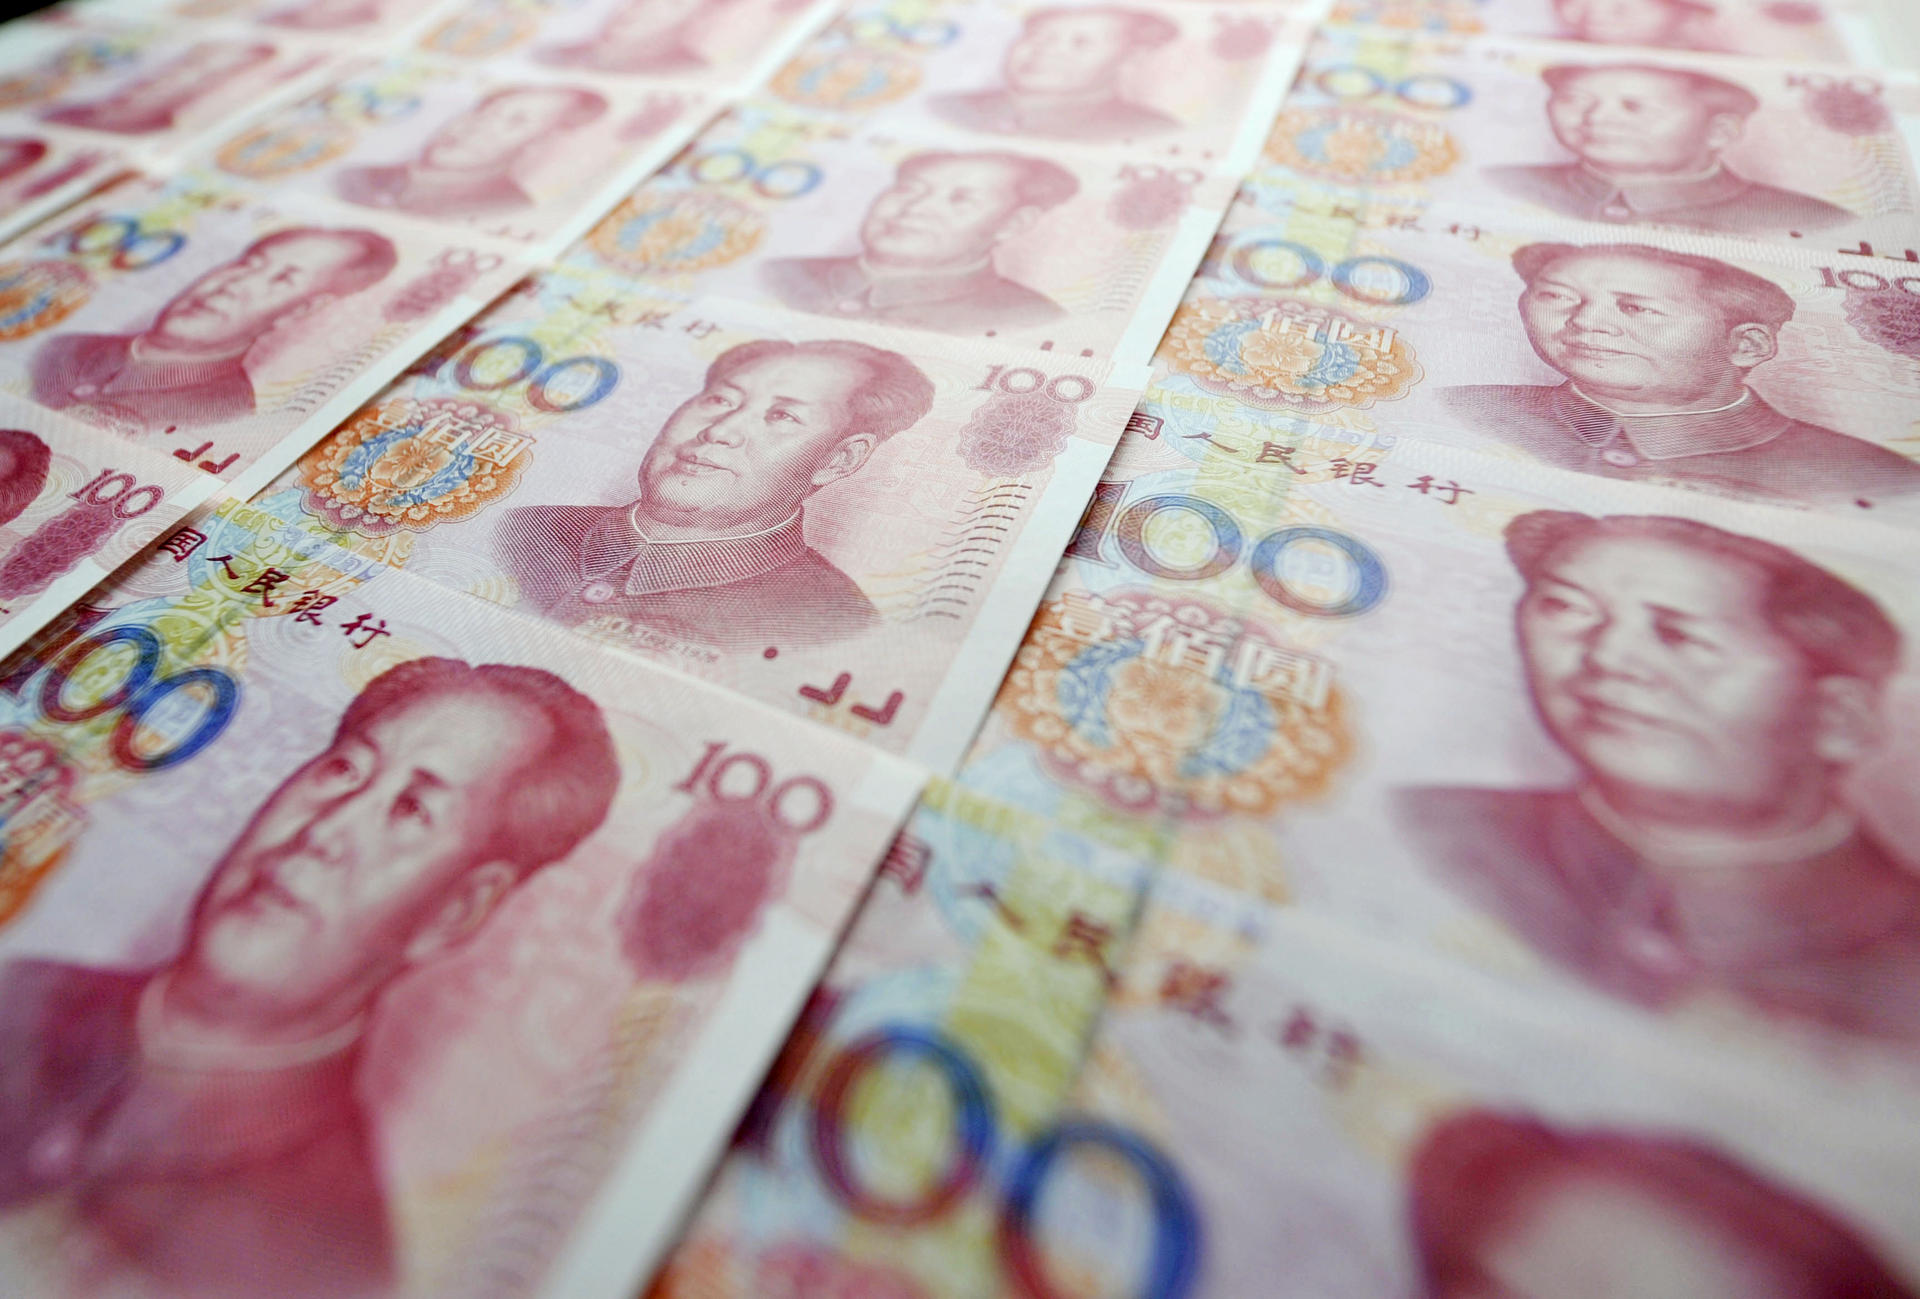 The yuan is expected to be a shoo-in for the International Monetary Fund's reserve currency basket after its managing director Christine Lagarde's public endorsement of the currency. Photo: Kyodo